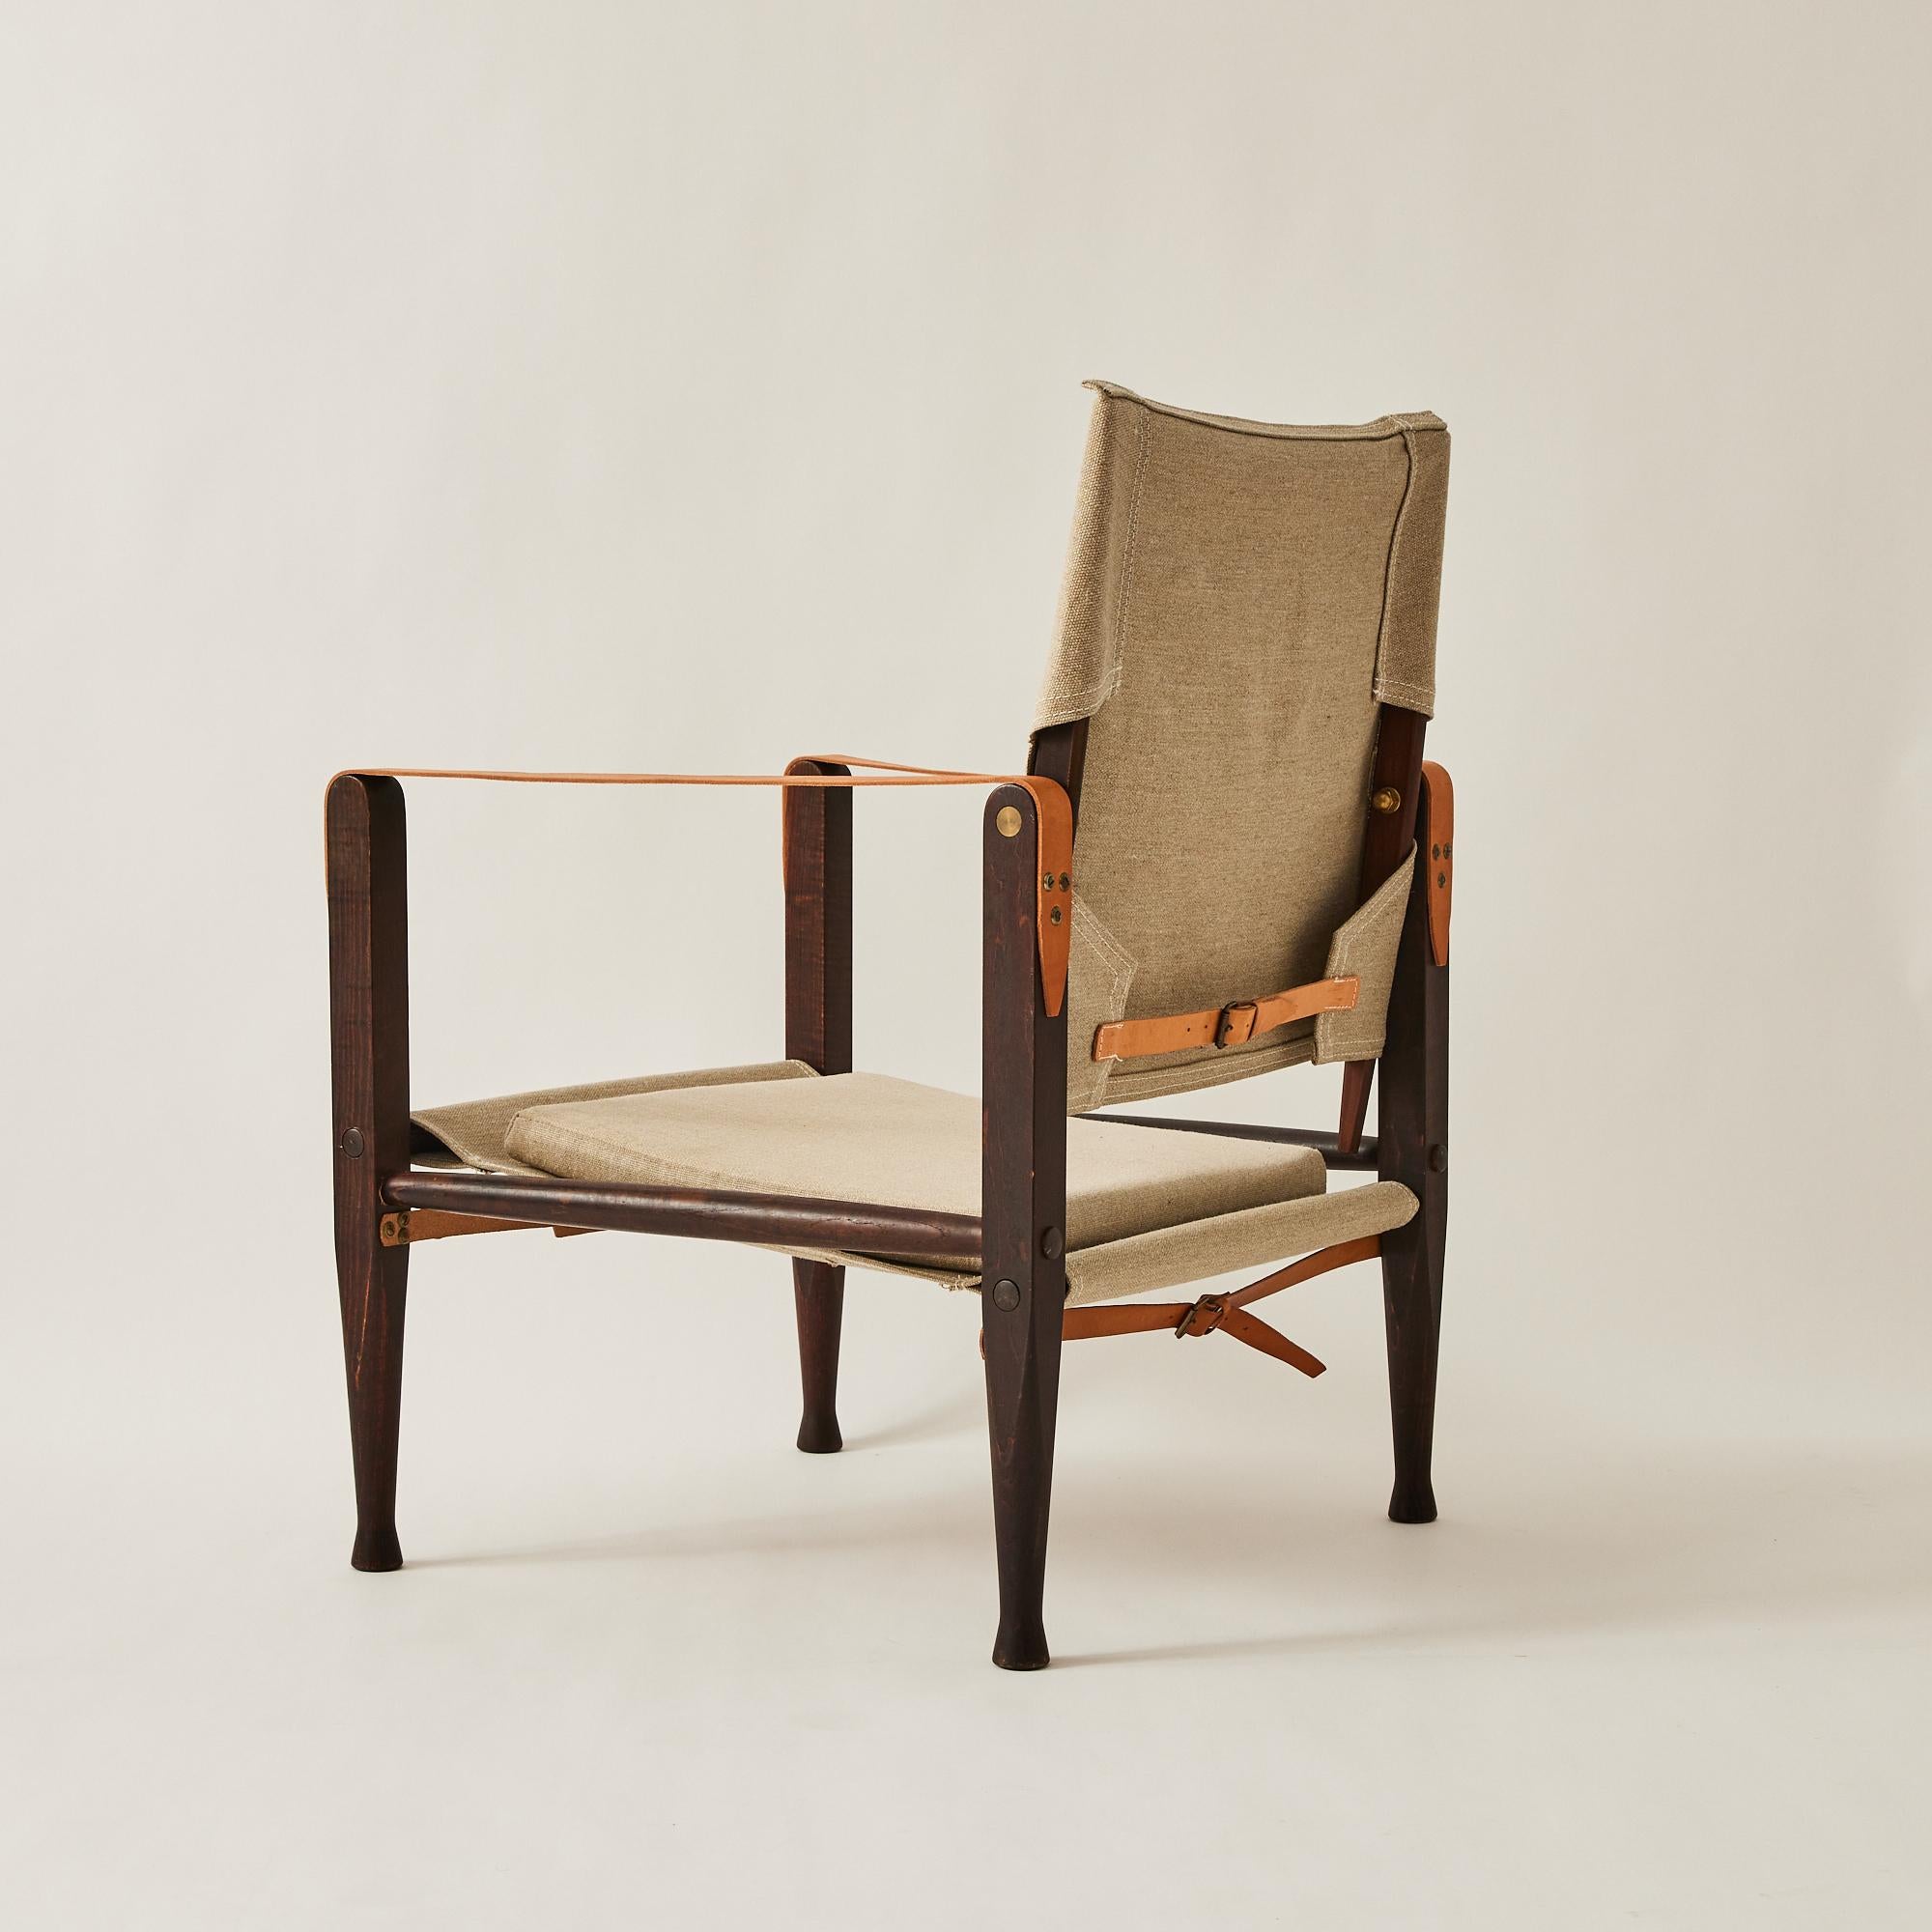 20th Century Kaare Klint Safari Chairs for Rud Rasmussen in Ash and Canvas- a Pair For Sale